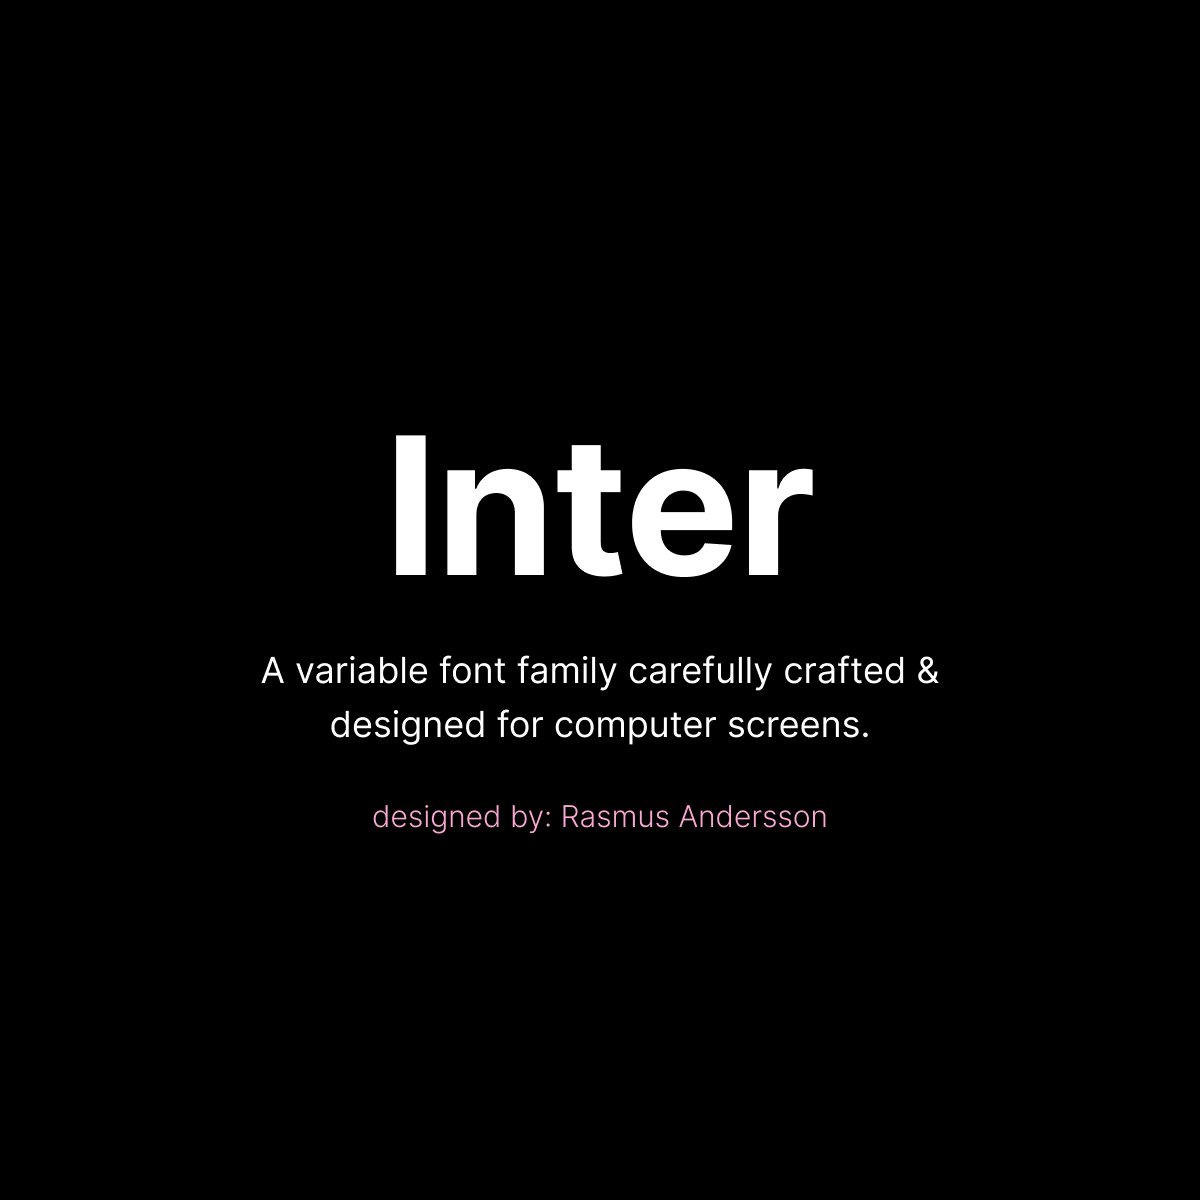 Inter font by Rasmus Andersson